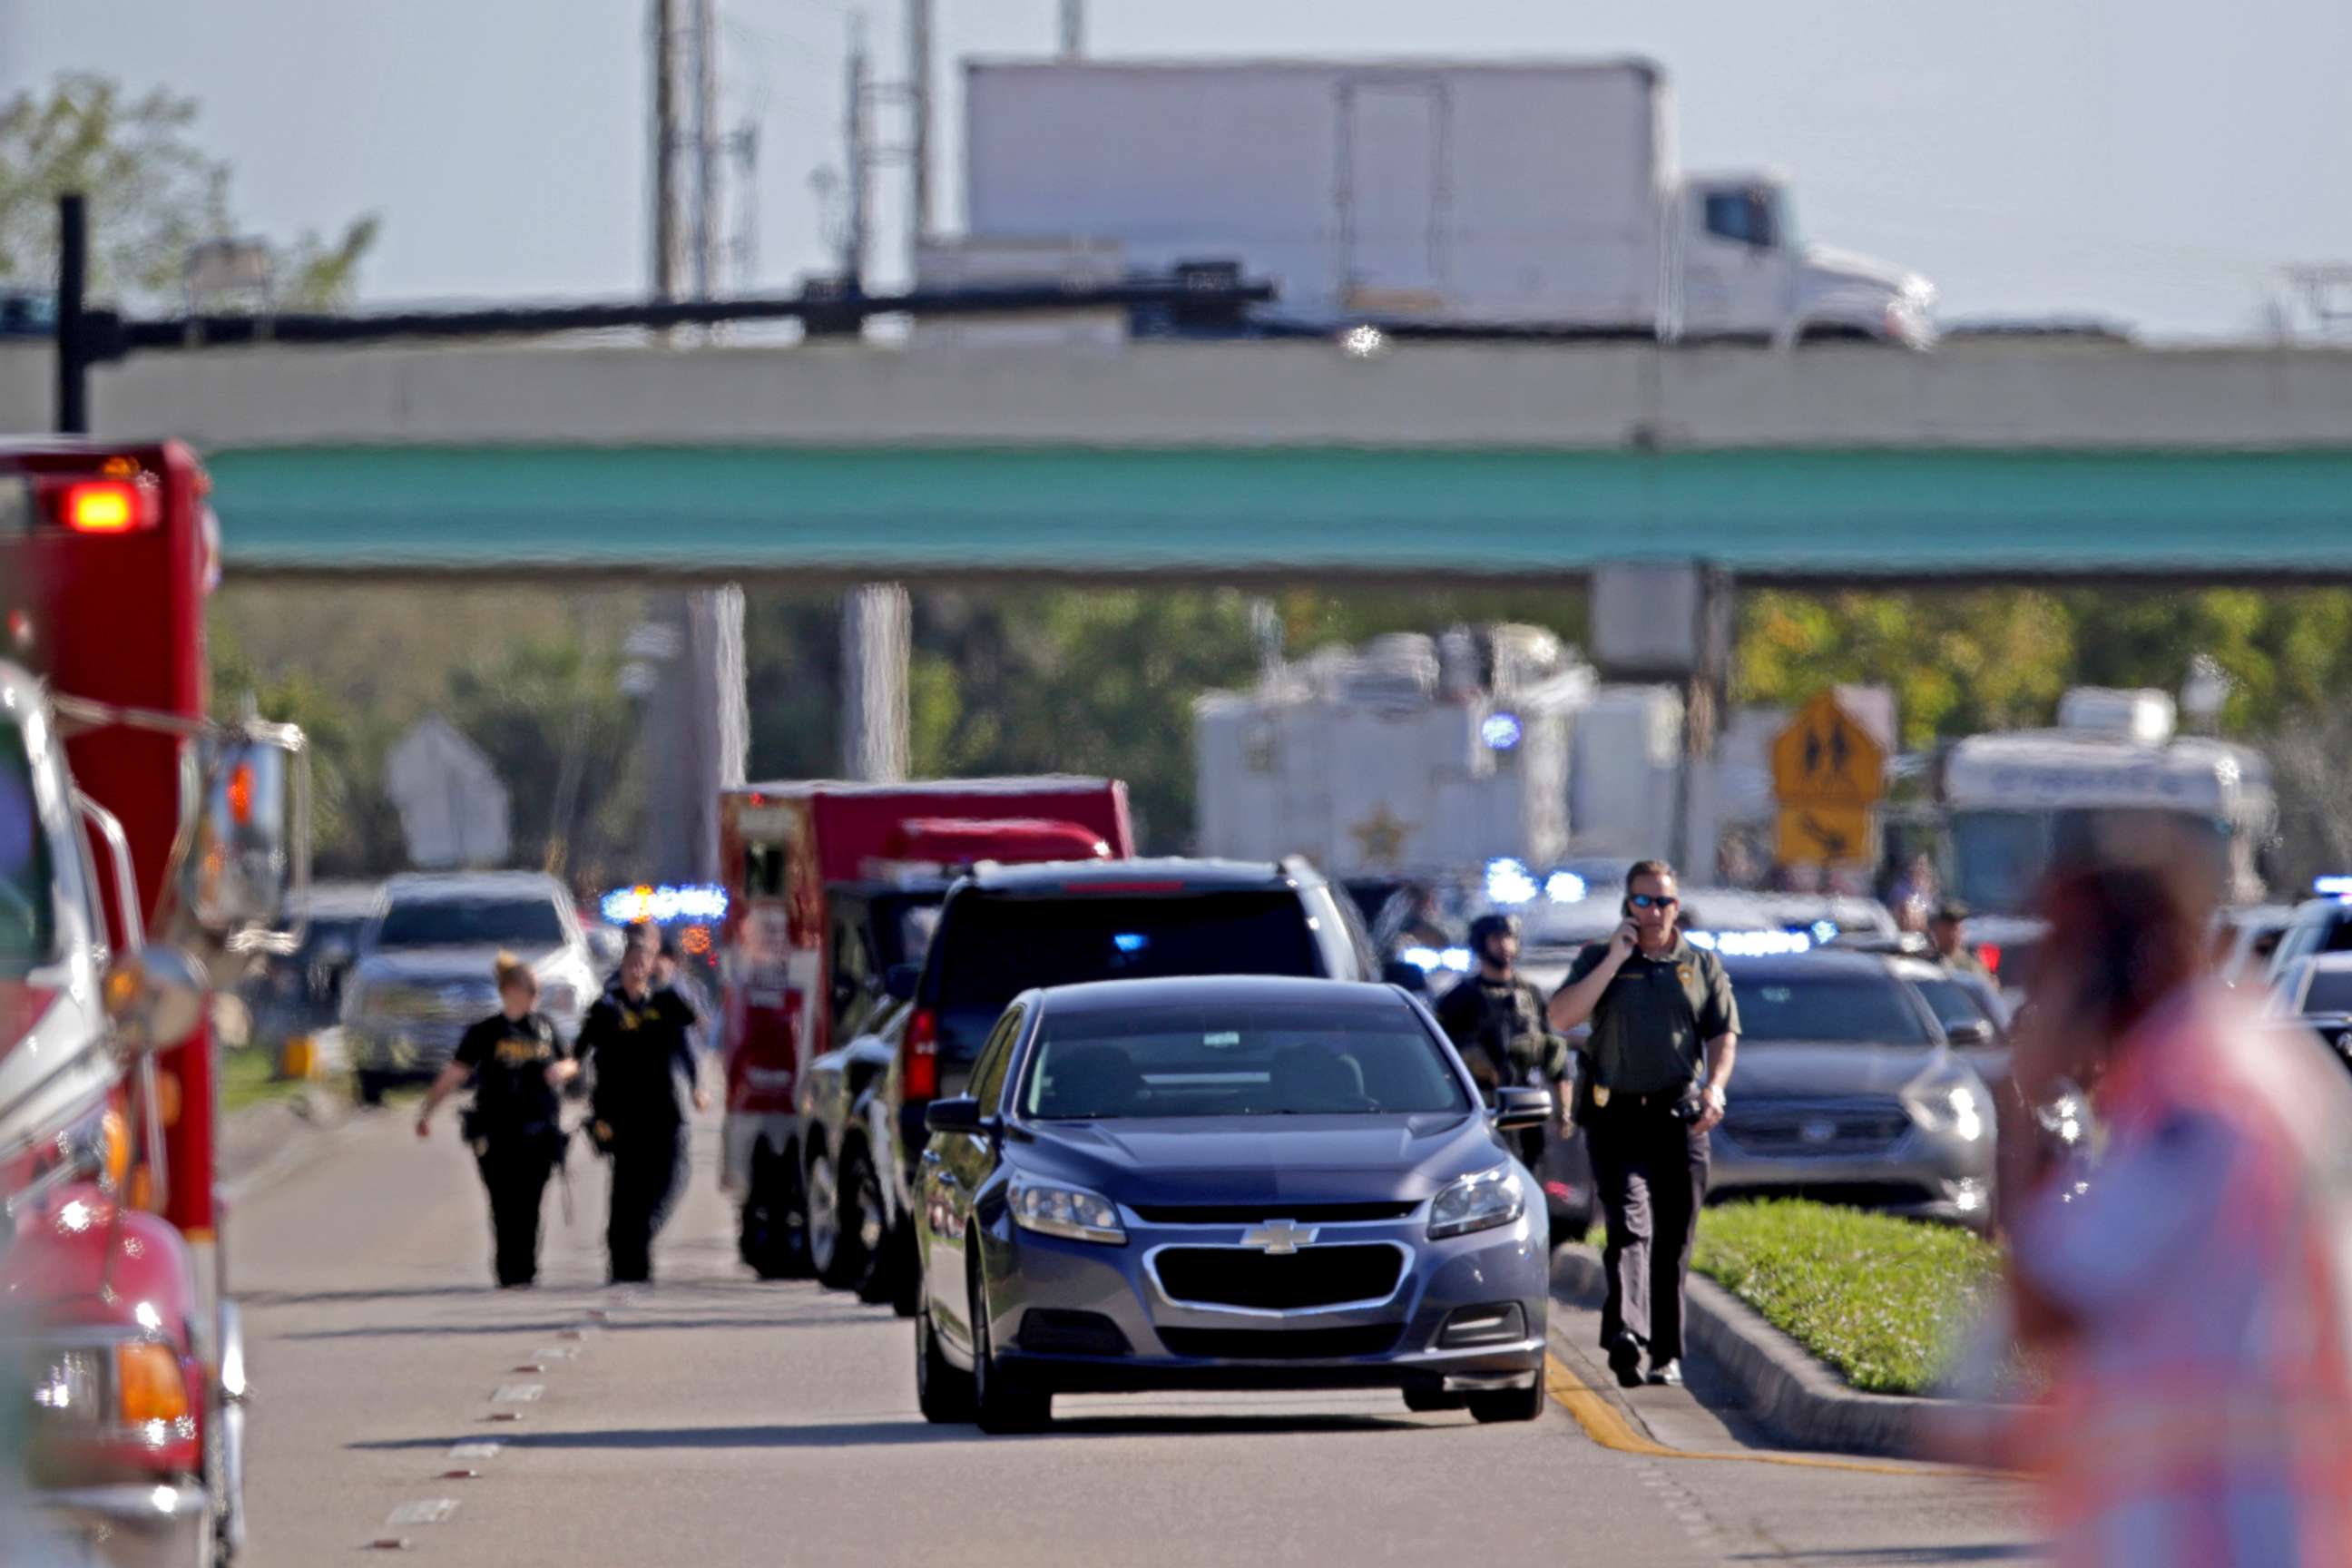 PHOTO: Police and fire rescue vehicles converge following a shooting at Marjory Stoneman Douglas High School in Parkland, Fla., Feb. 14, 2018.